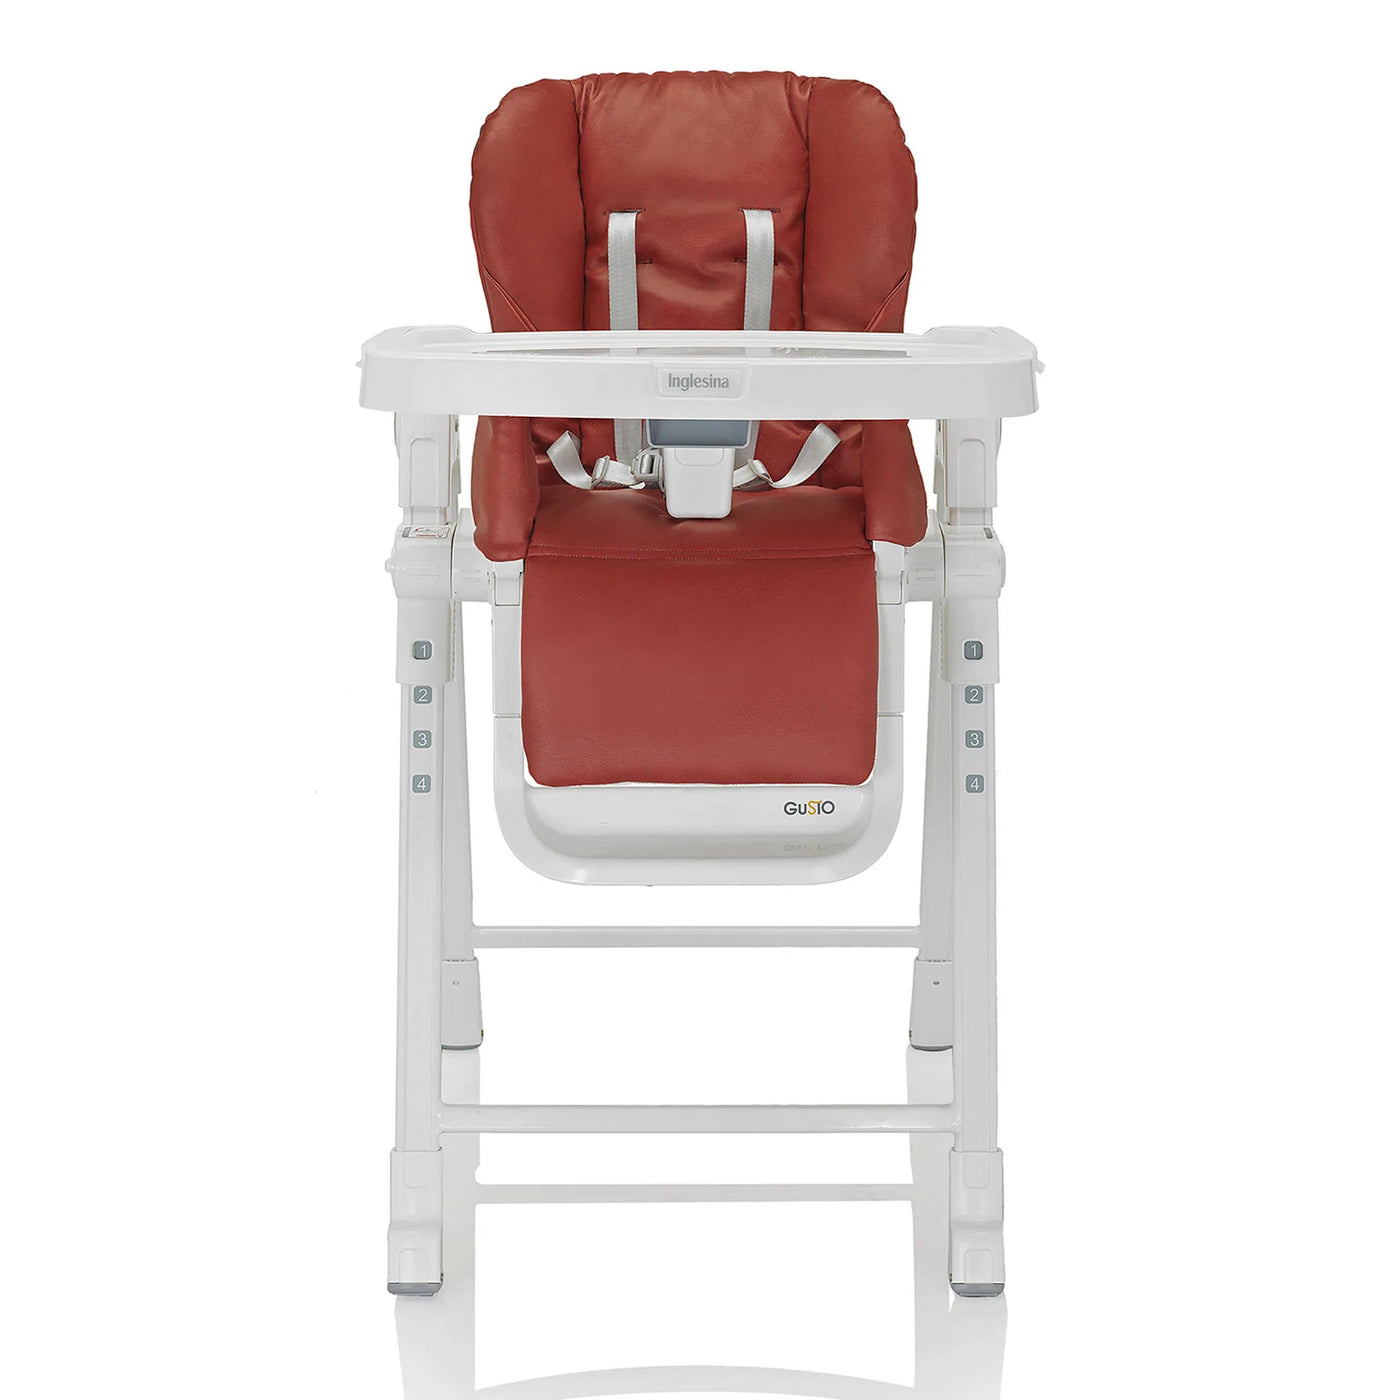 Inglesina Gusto Folding Convertible High Chair With Removable Tray, Red - $100